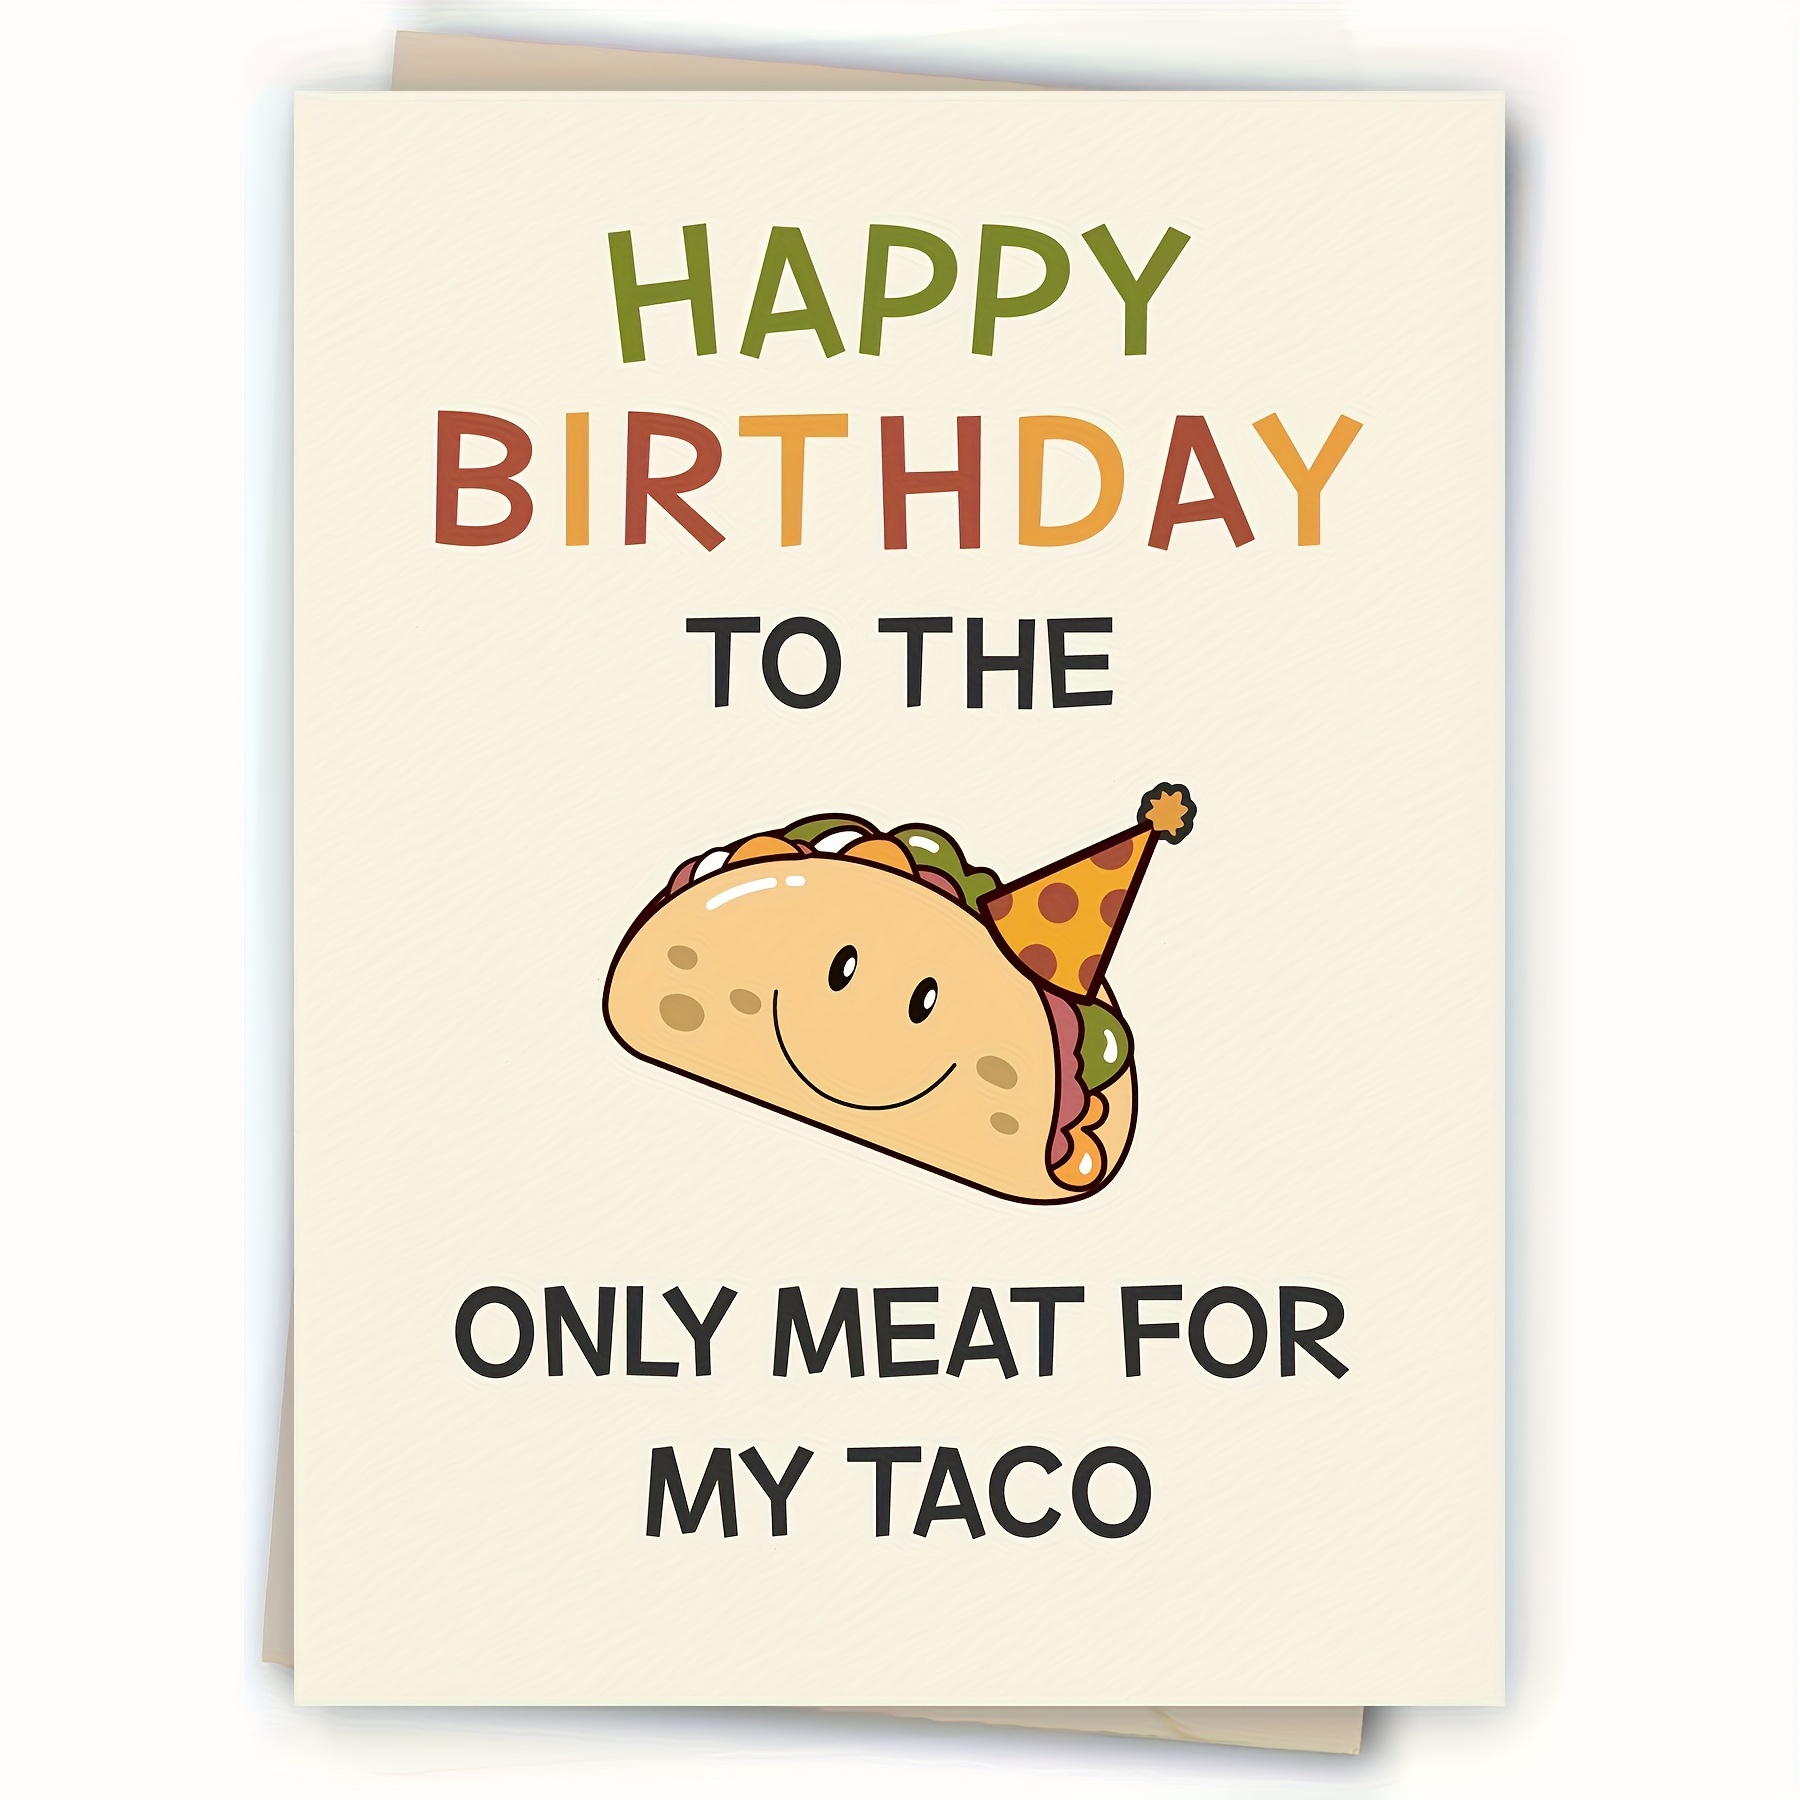 Funny Happy Birthday Card - Fun Gifts & Cards